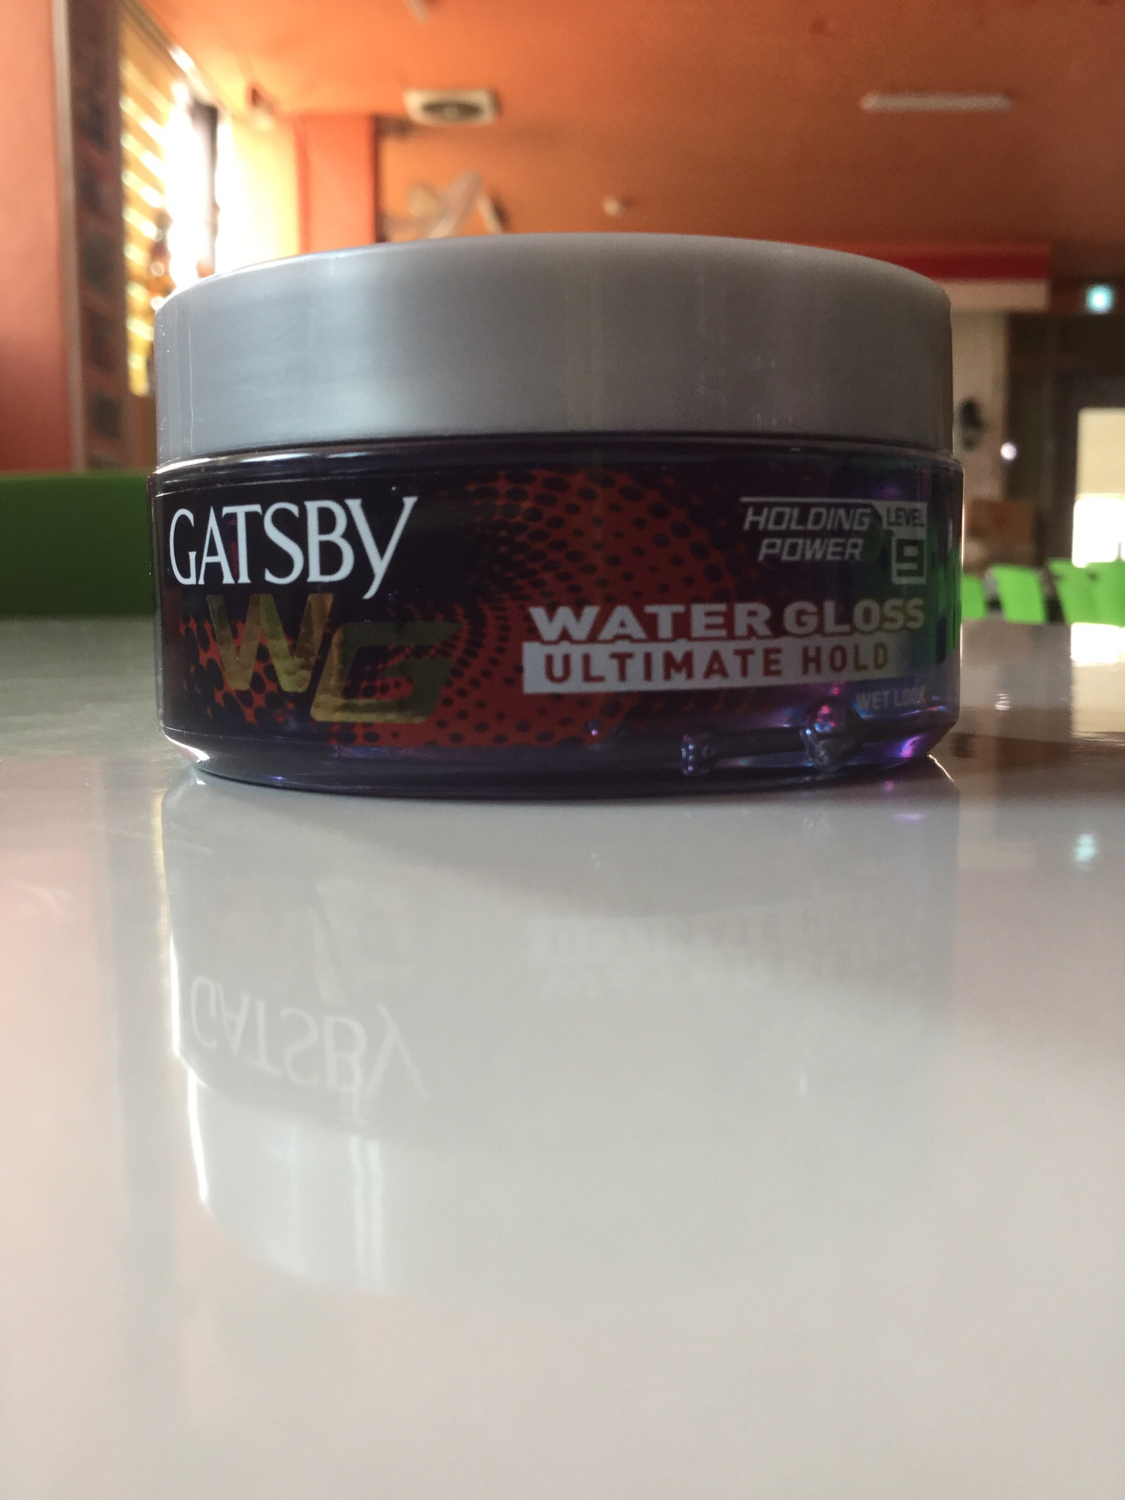 Gatsby WG Ultimate Hold 75g